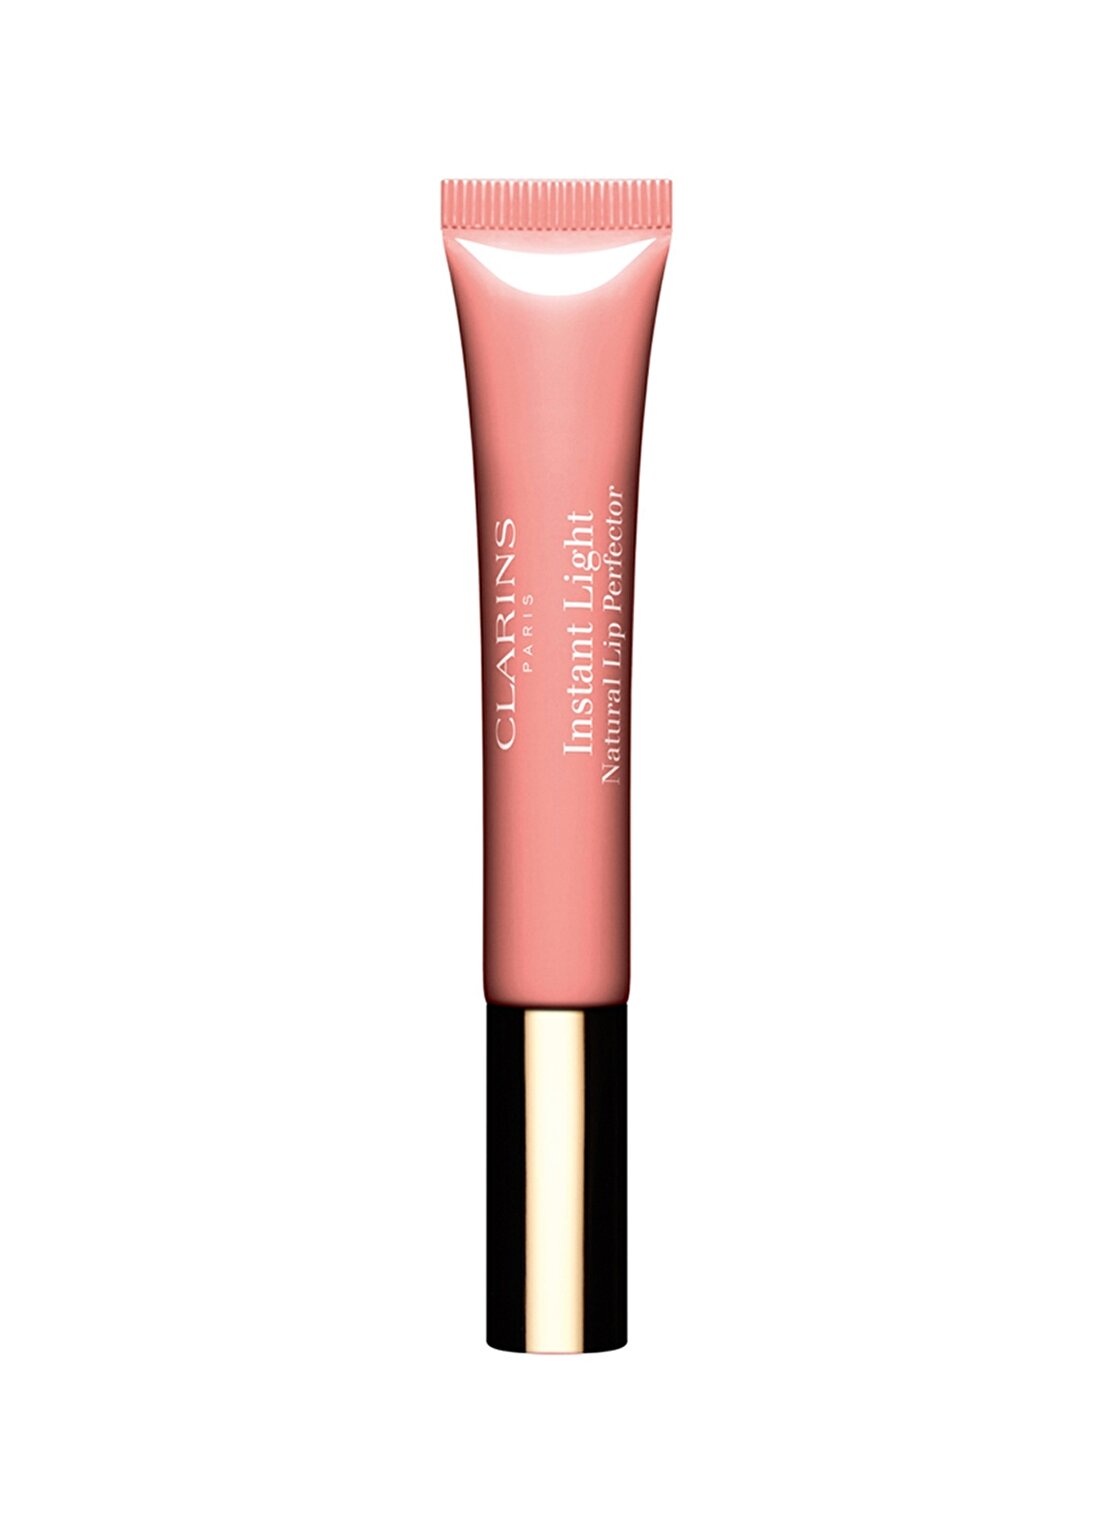 Clarins Instant Light Natural Lip Perfector 05 - Candy Shimmer Ruj